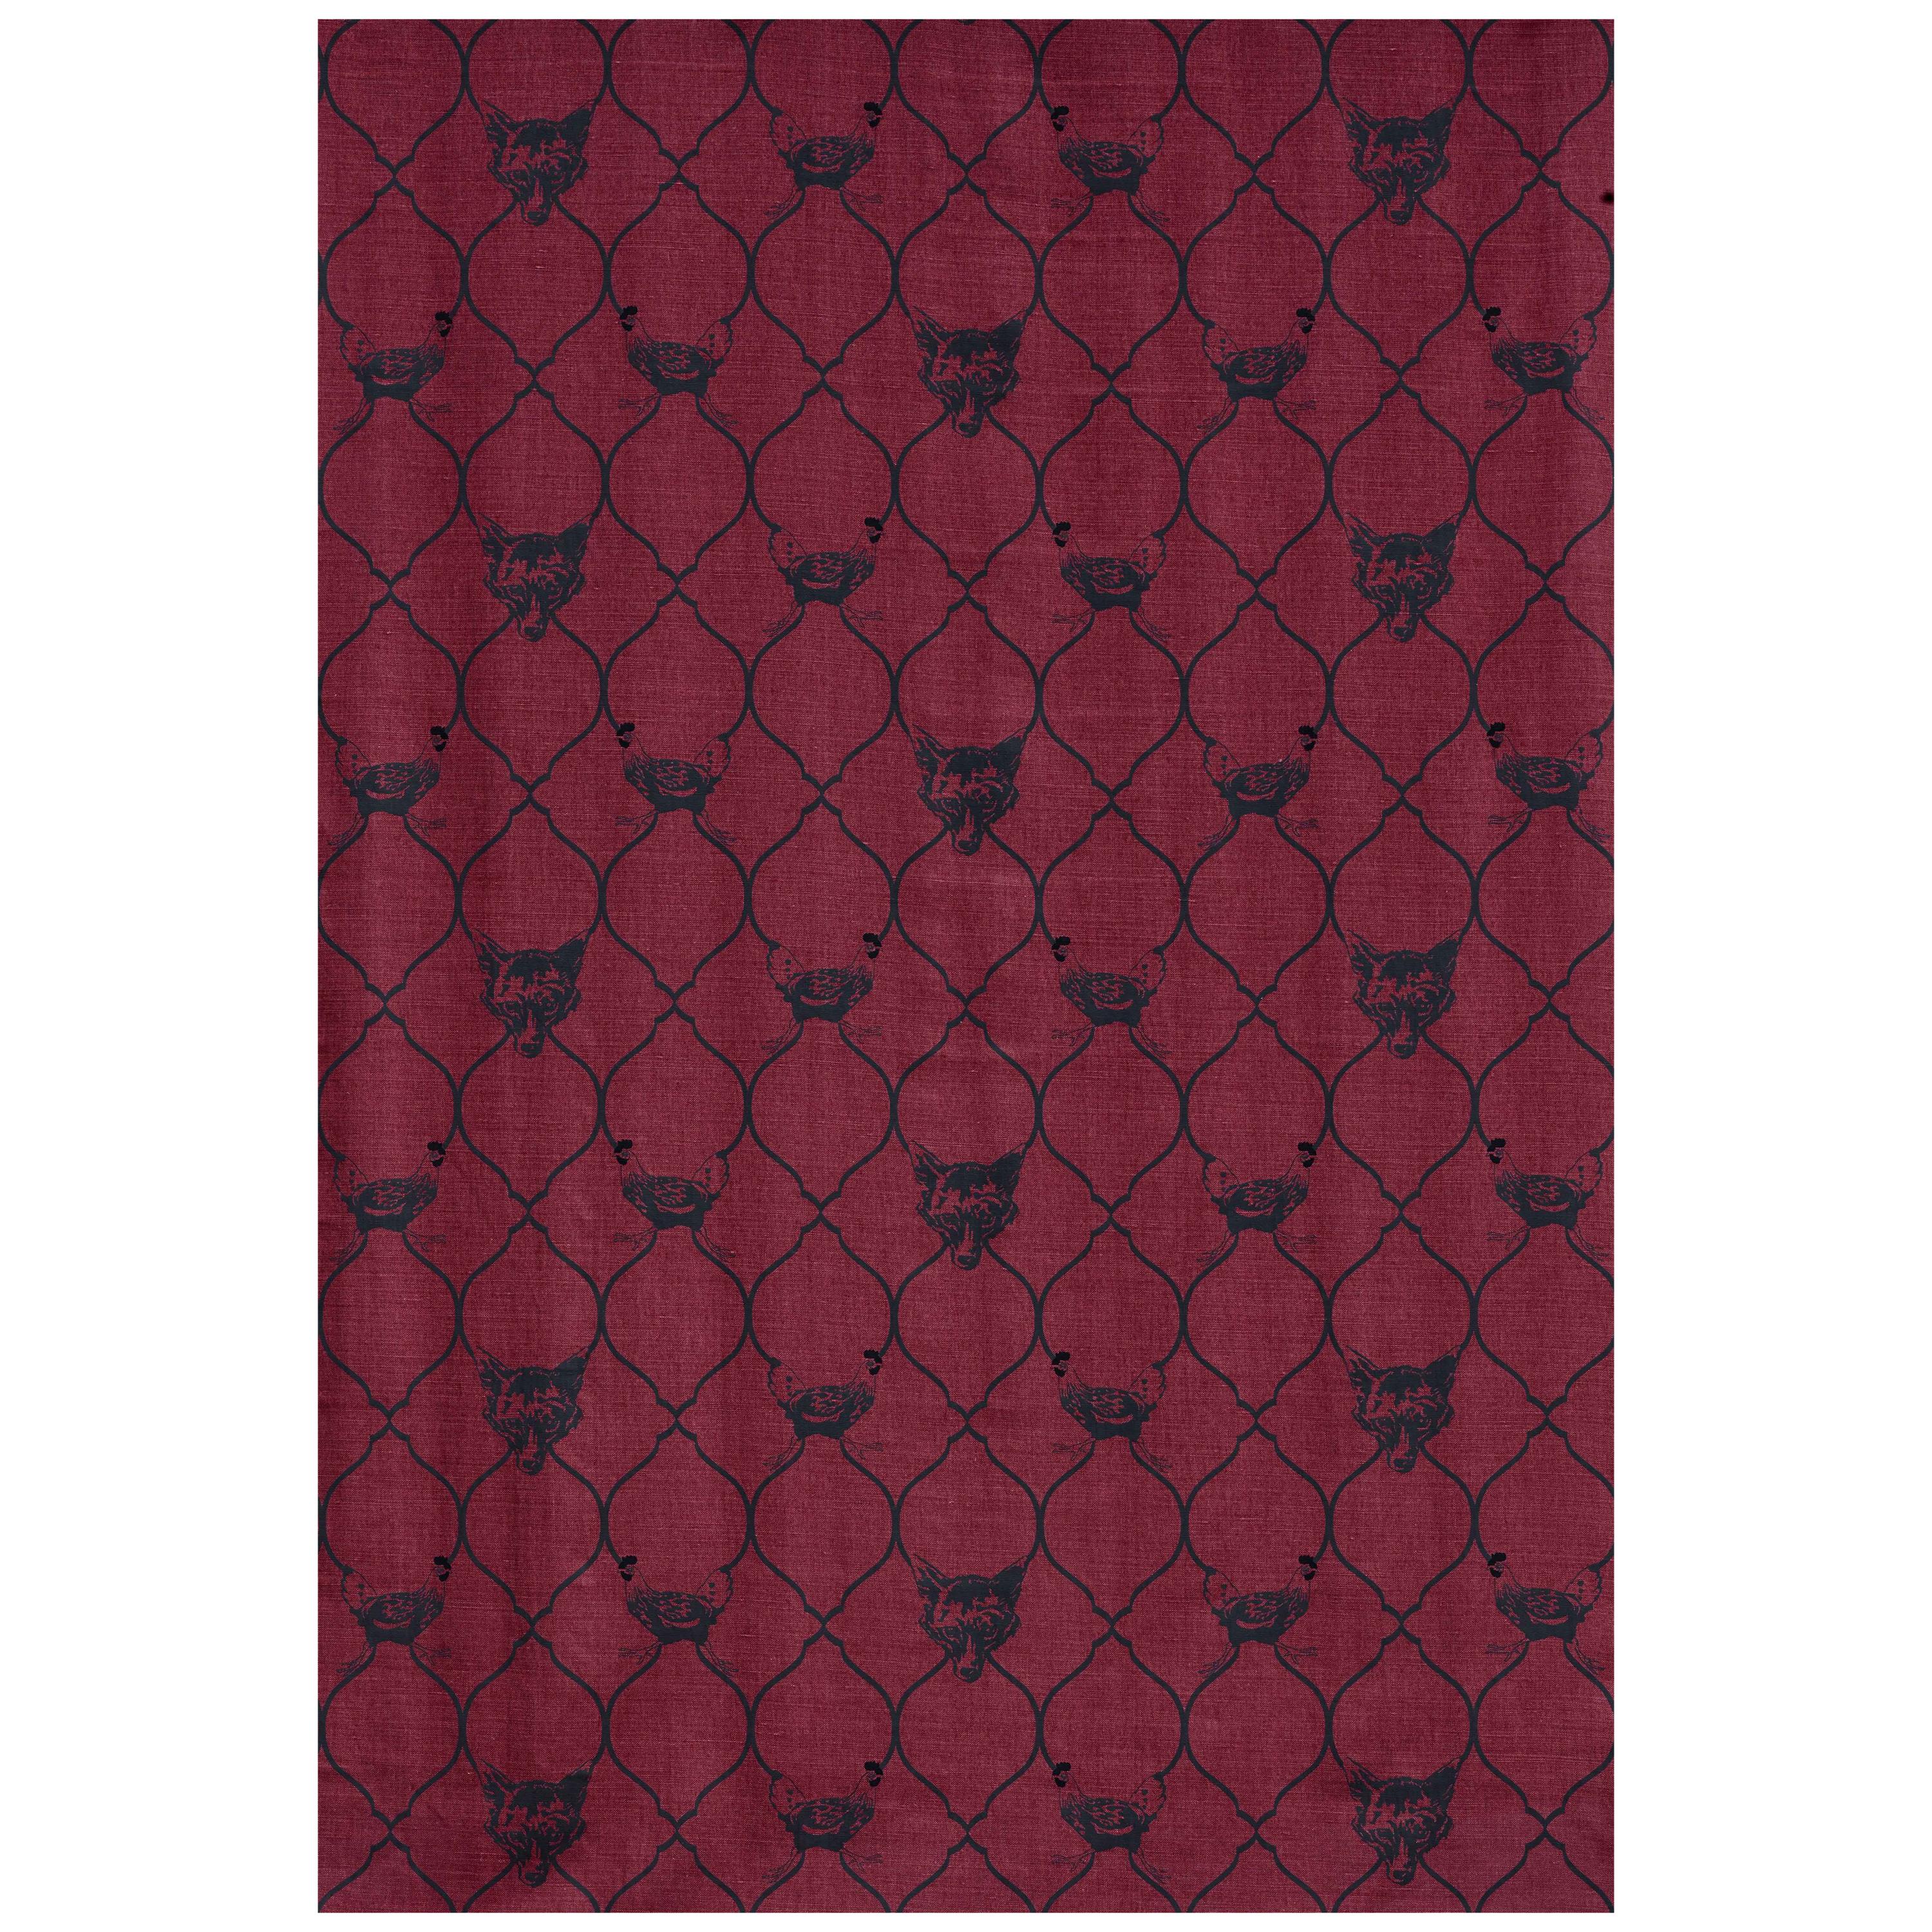 'Fox & Hen' Contemporary, Traditional Fabric in Brick For Sale